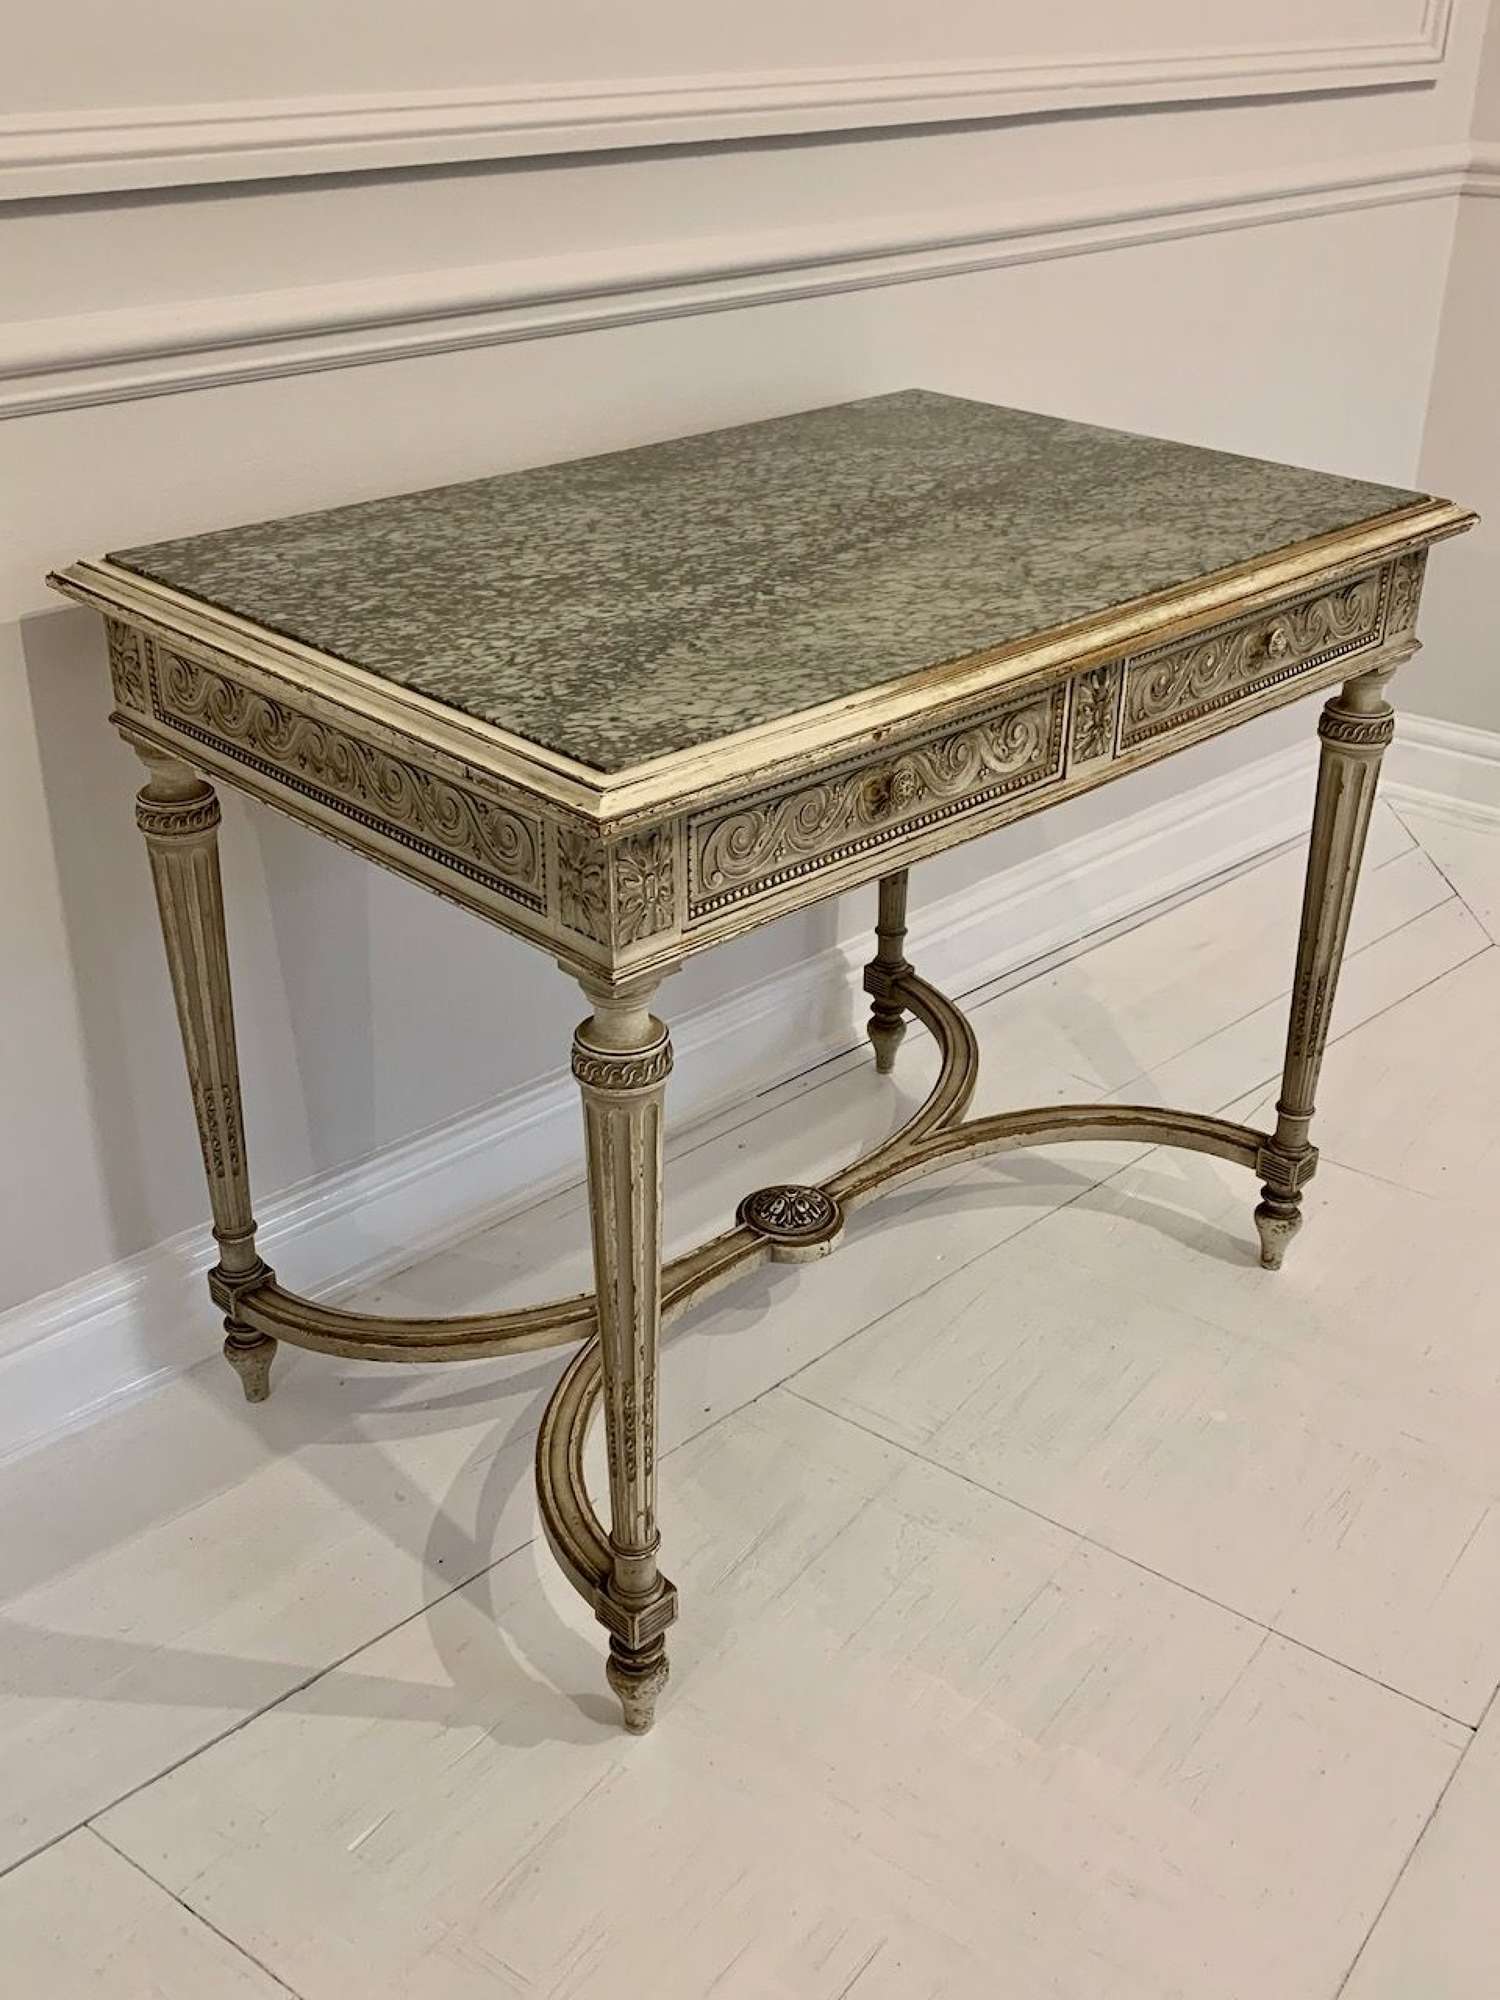 Pretty marble and carved wood table